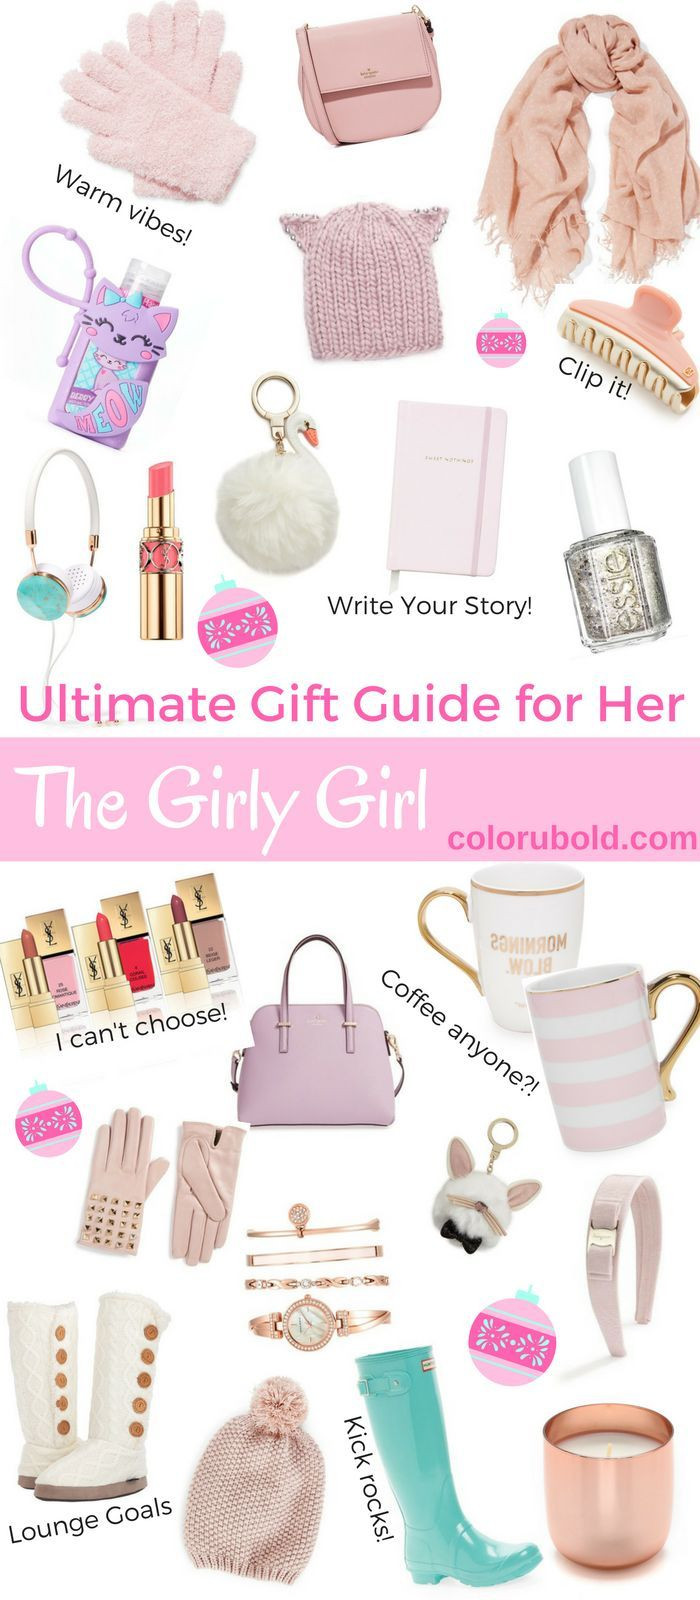 Gift Ideas For Girls
 The Ultimate Gift Guide for the Girly Girl